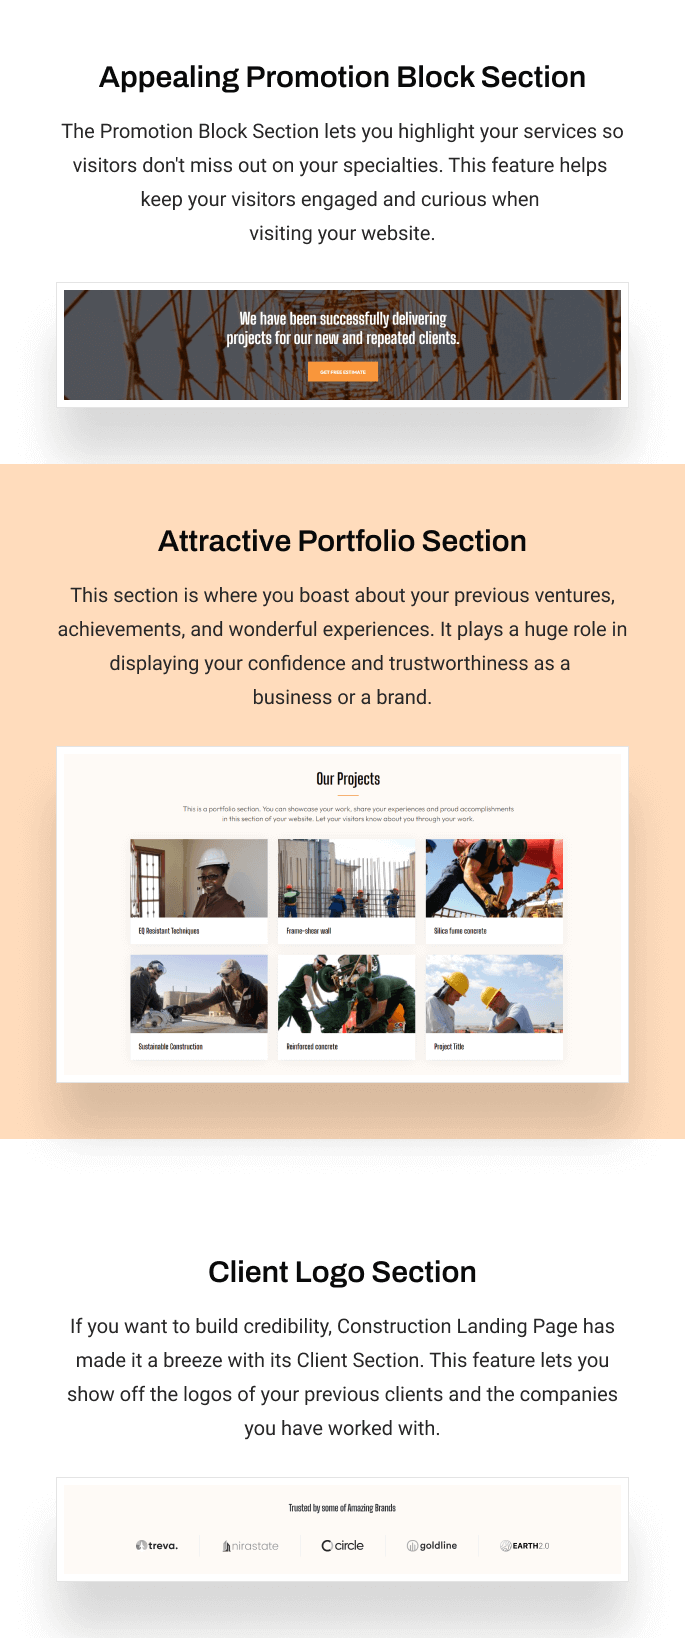 Different sections in Construction Landing Page Theme